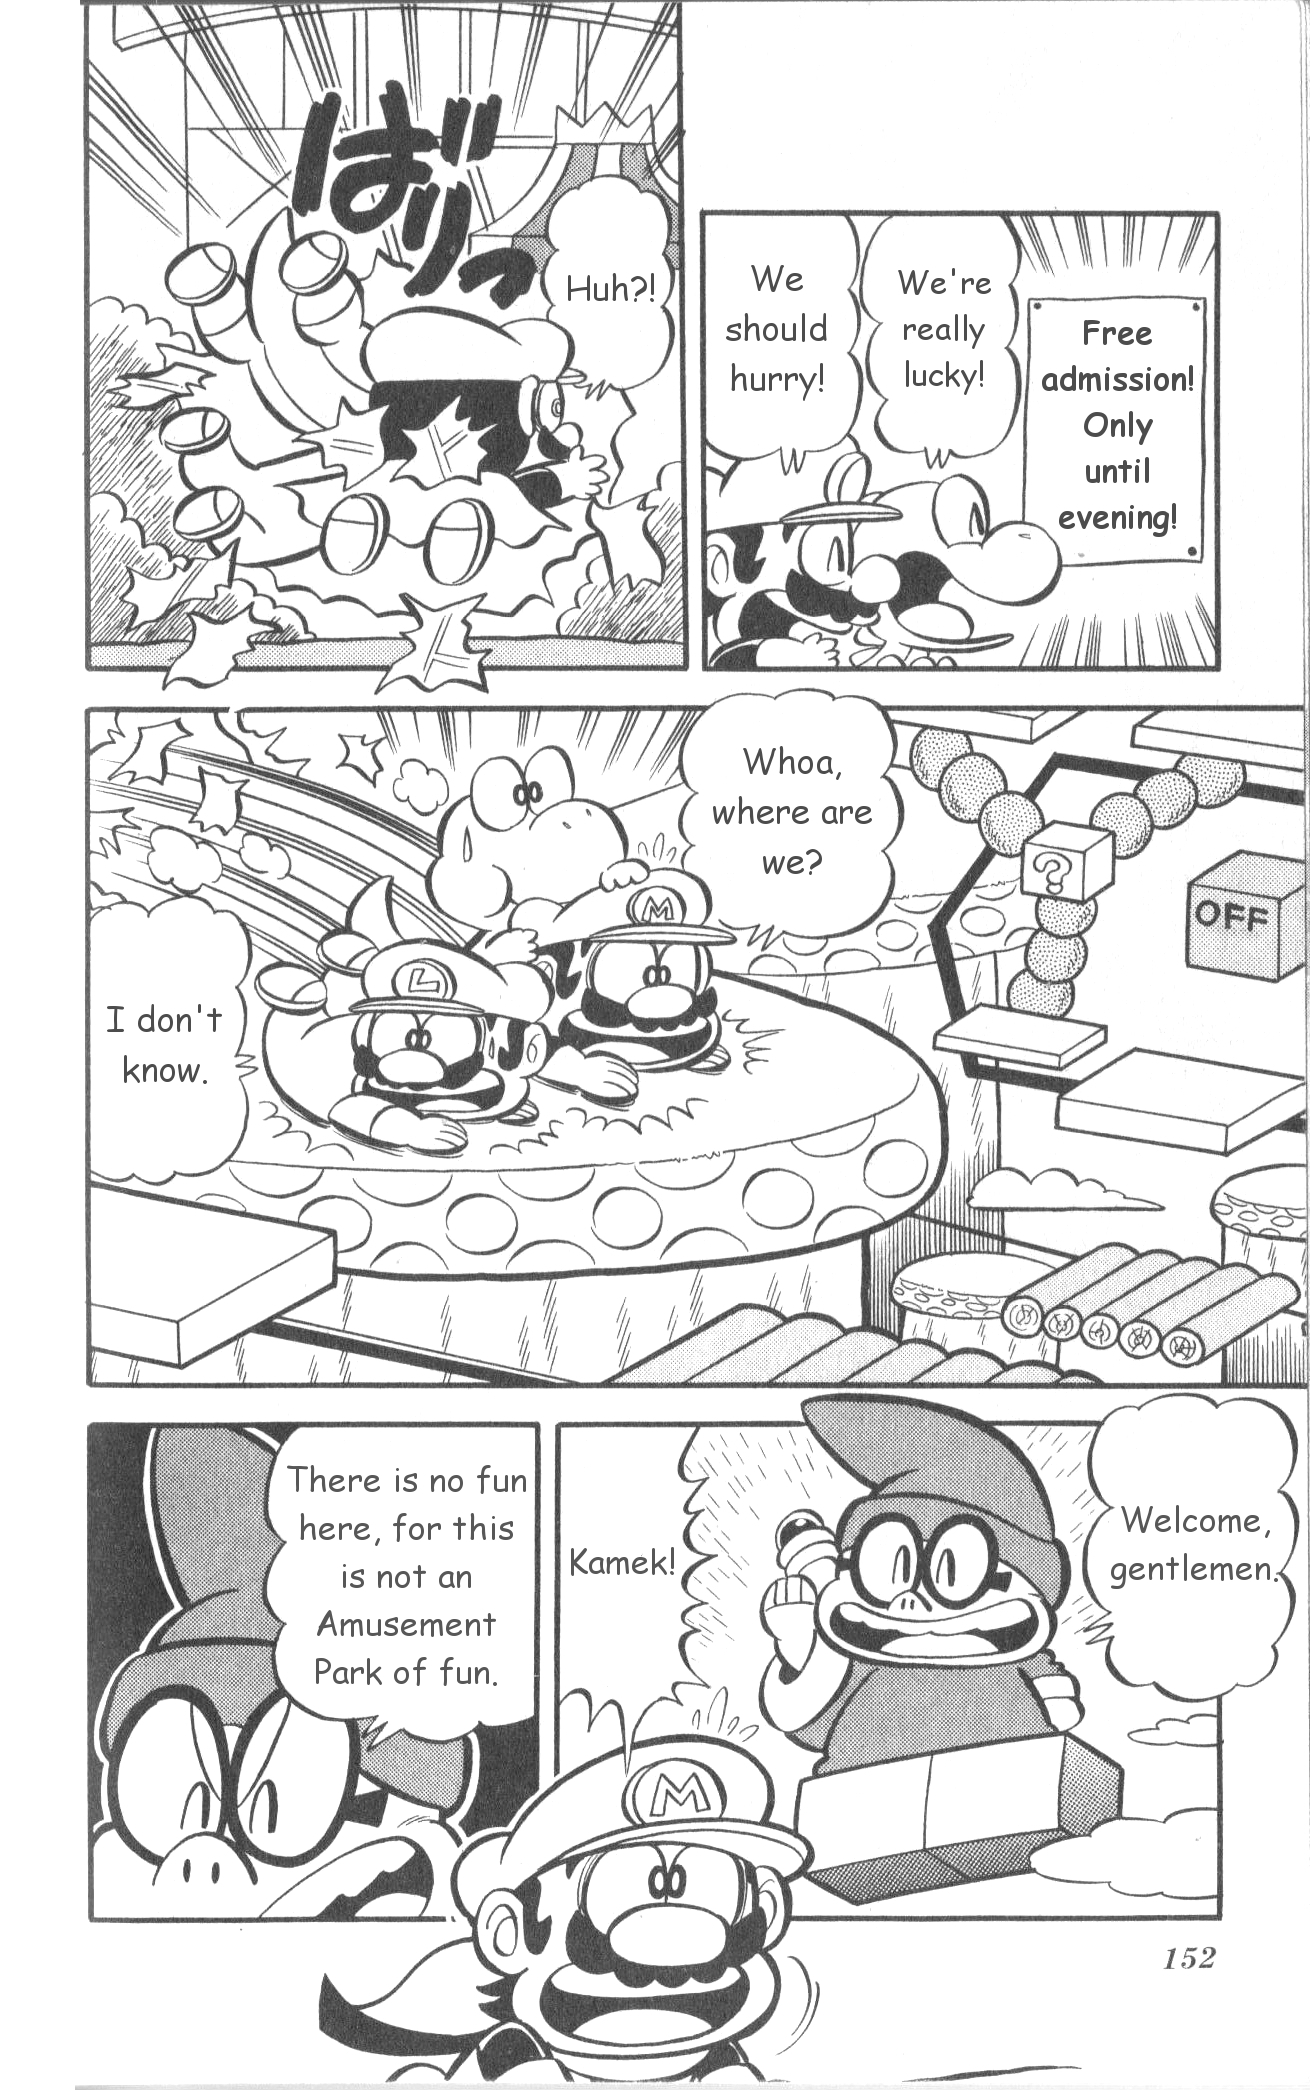 Super Mario-Kun Vol.1 Chapter 13: Kamek Comes Again! The Amusement Park From Hell?! - Picture 3